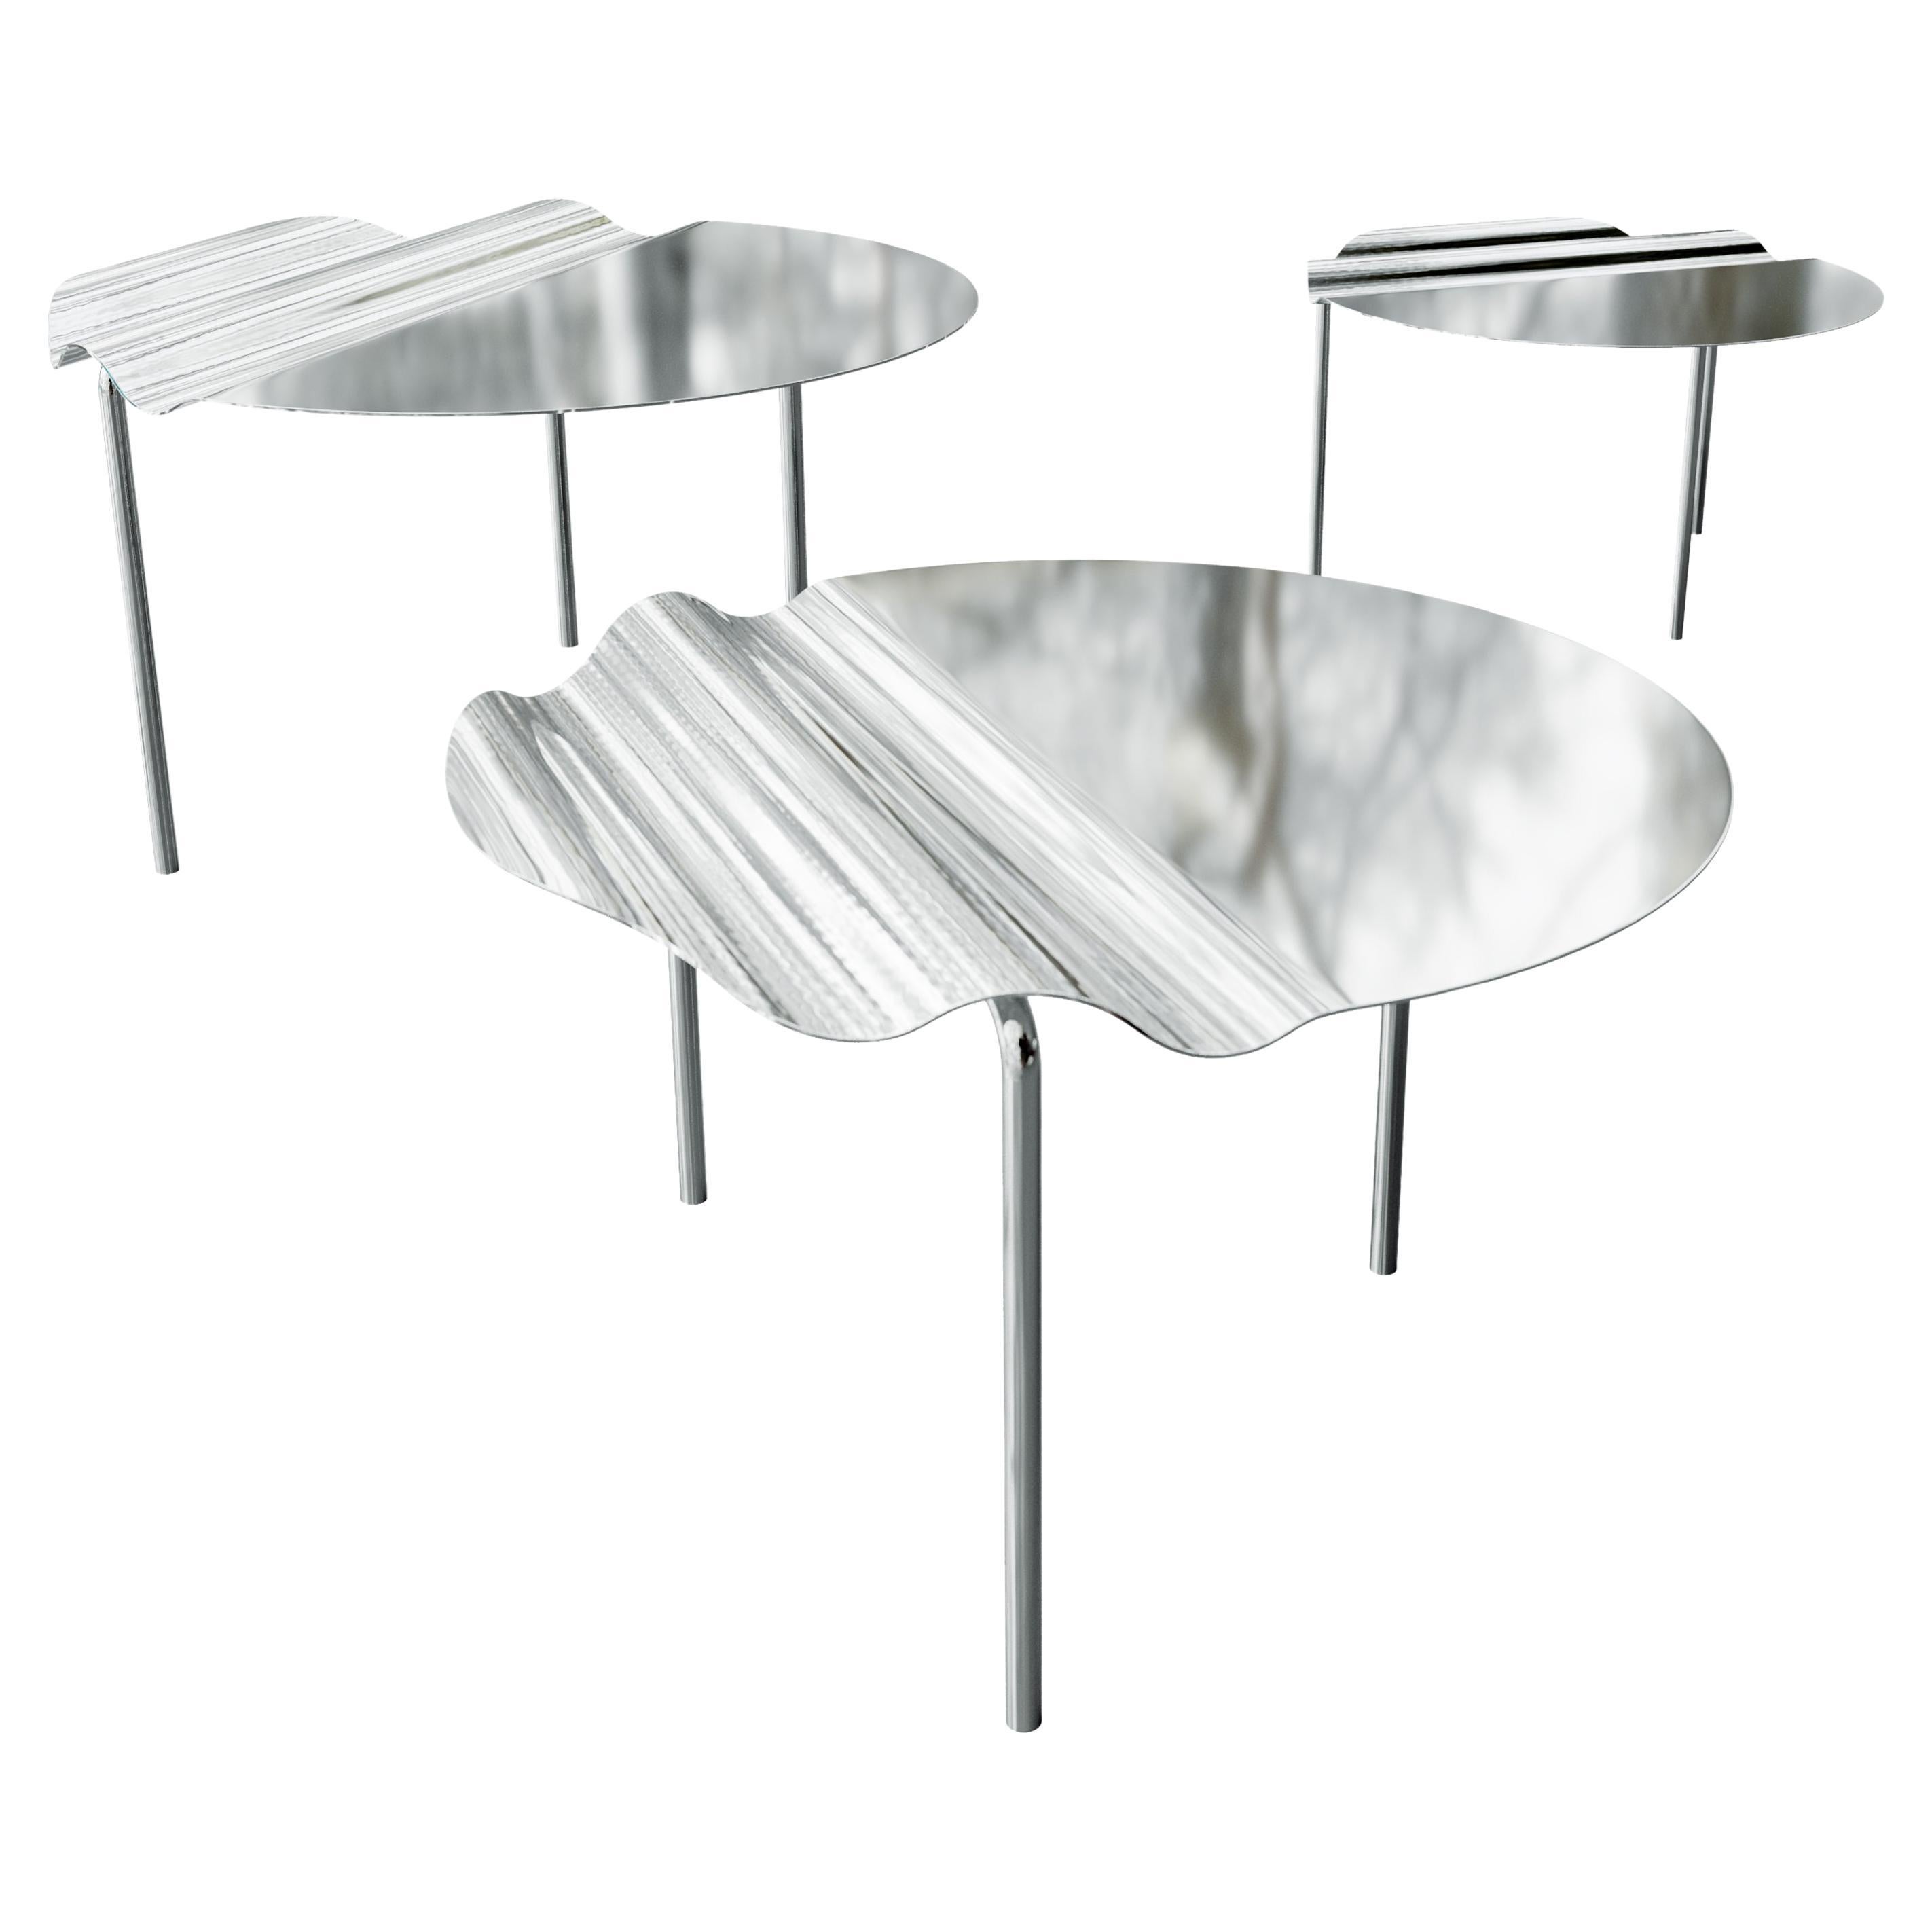 Set of Three Modern Low Tables Mount Made of Stainless Steel by DALI HOME